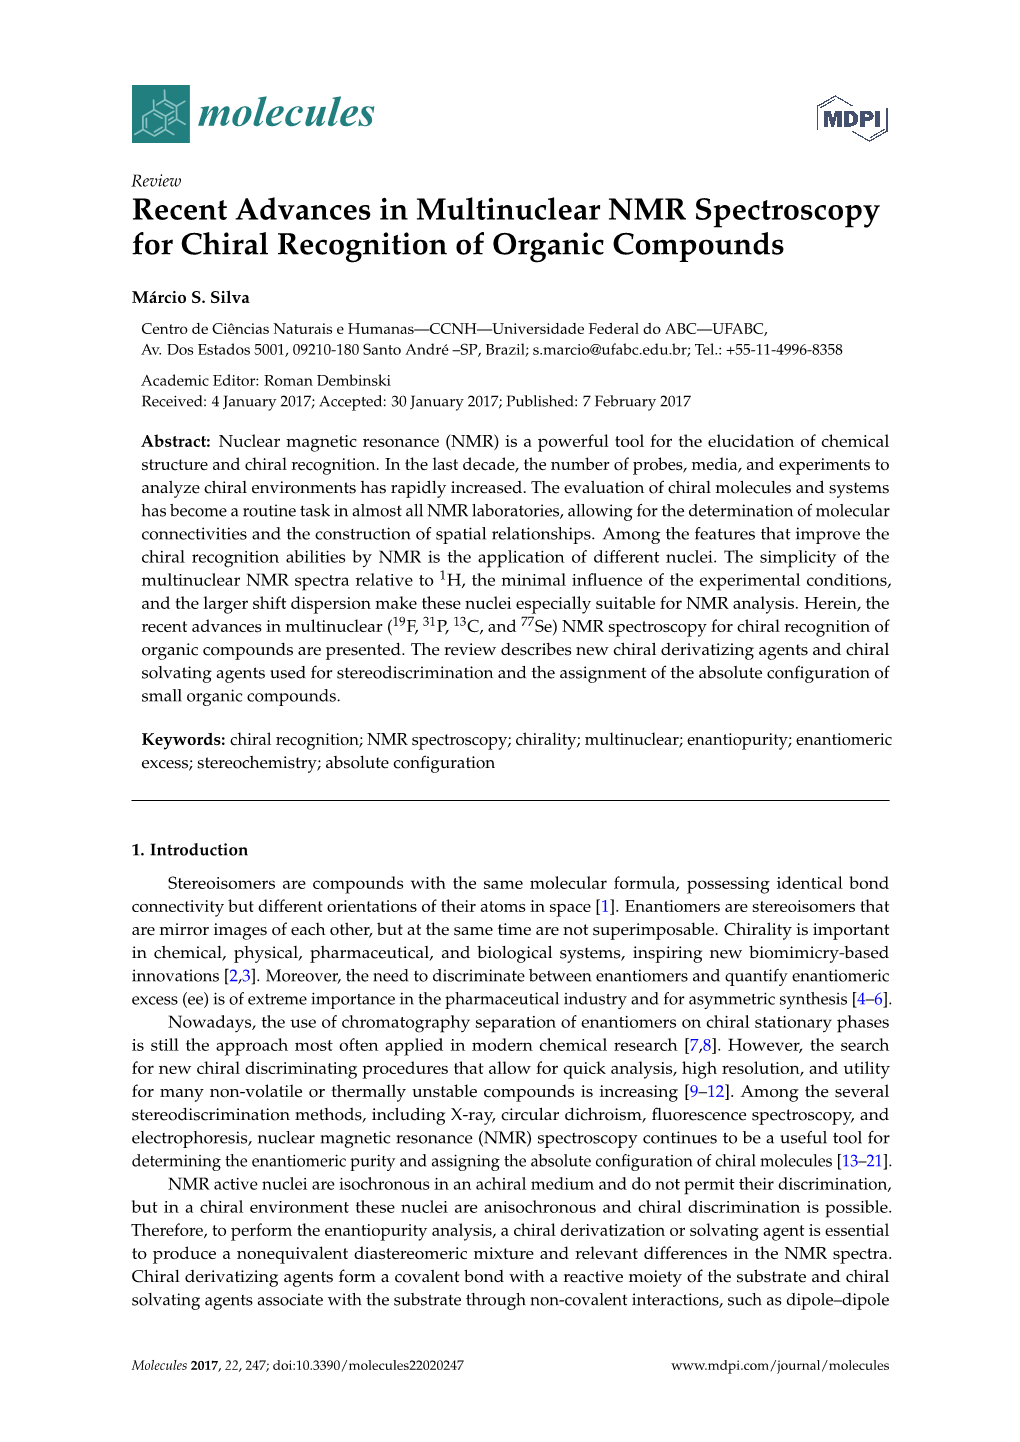 Recent Advances in Multinuclear NMR Spectroscopy for Chiral Recognition of Organic Compounds